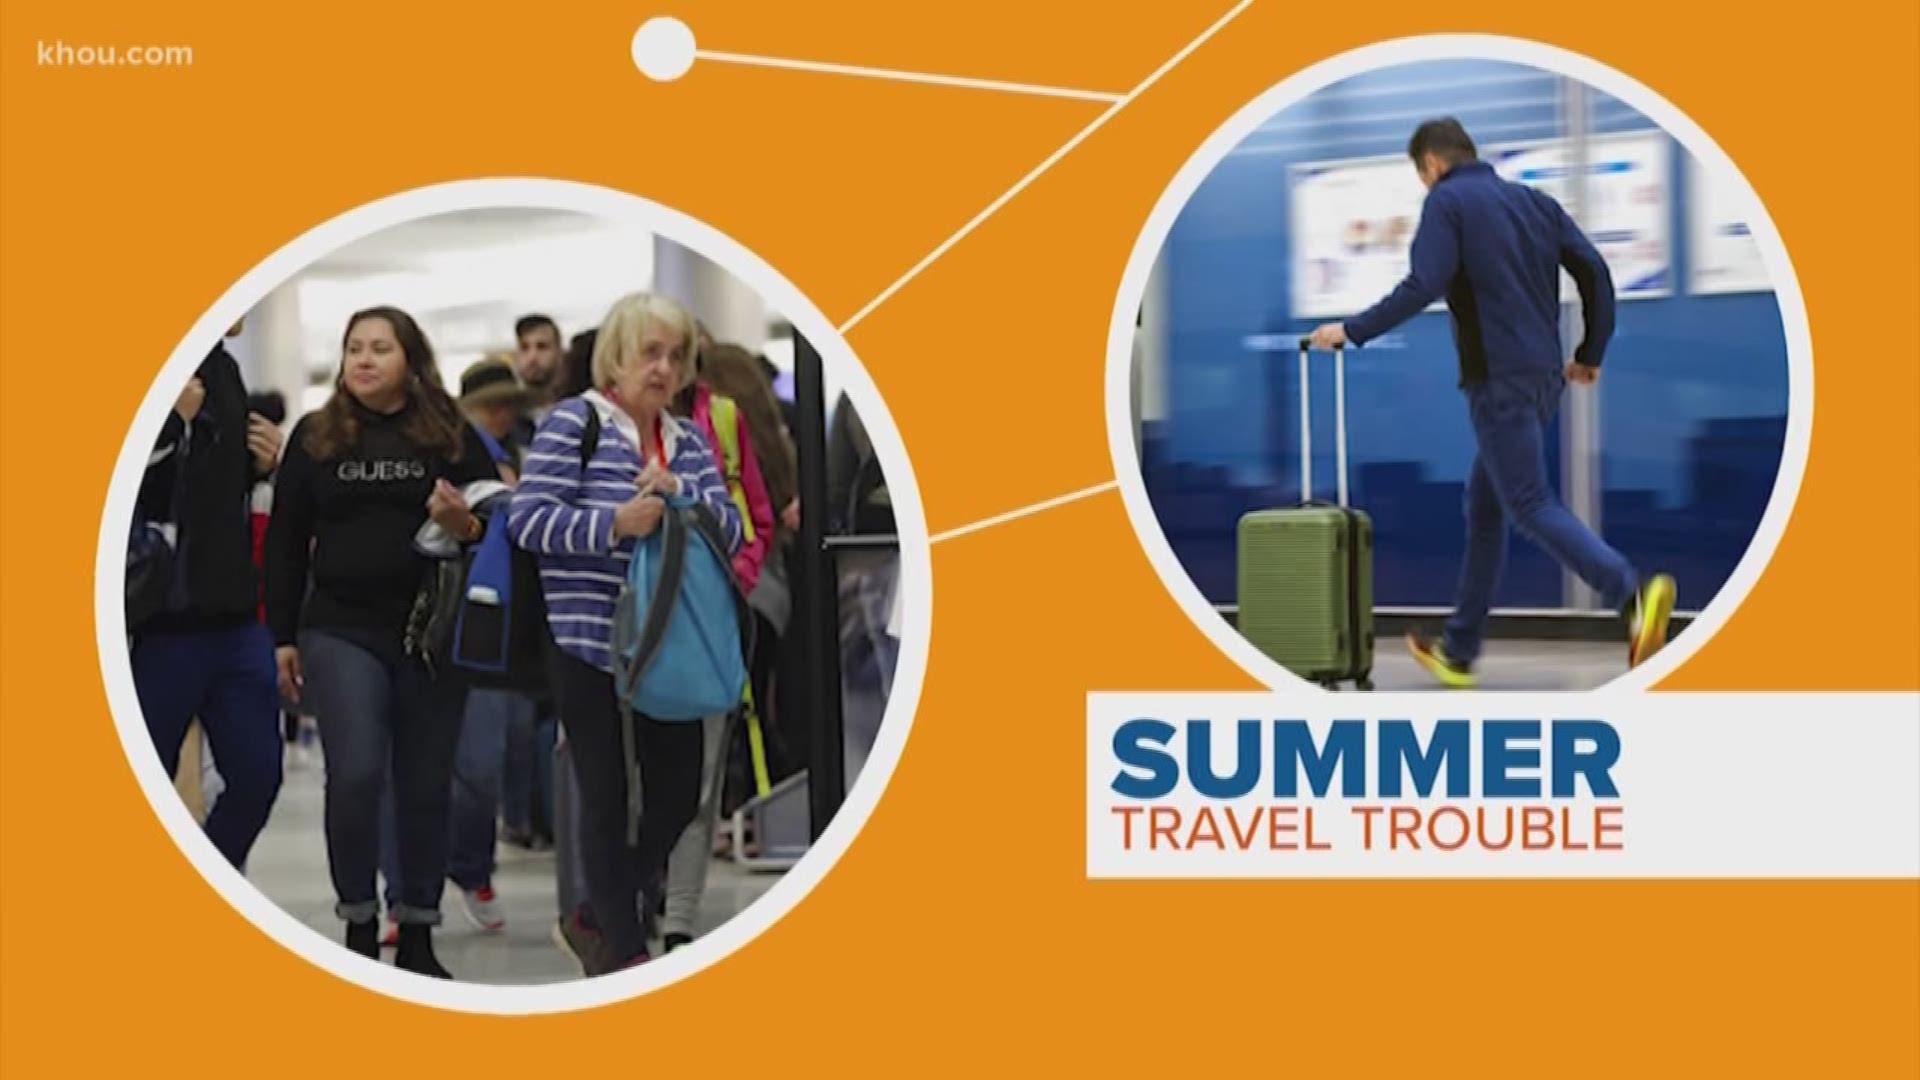 If you have a summer vacation coming up, get ready for long lines and delays at the airport. It's expected to be a nightmare travel season. Our Marcelino Benito connects the dot.